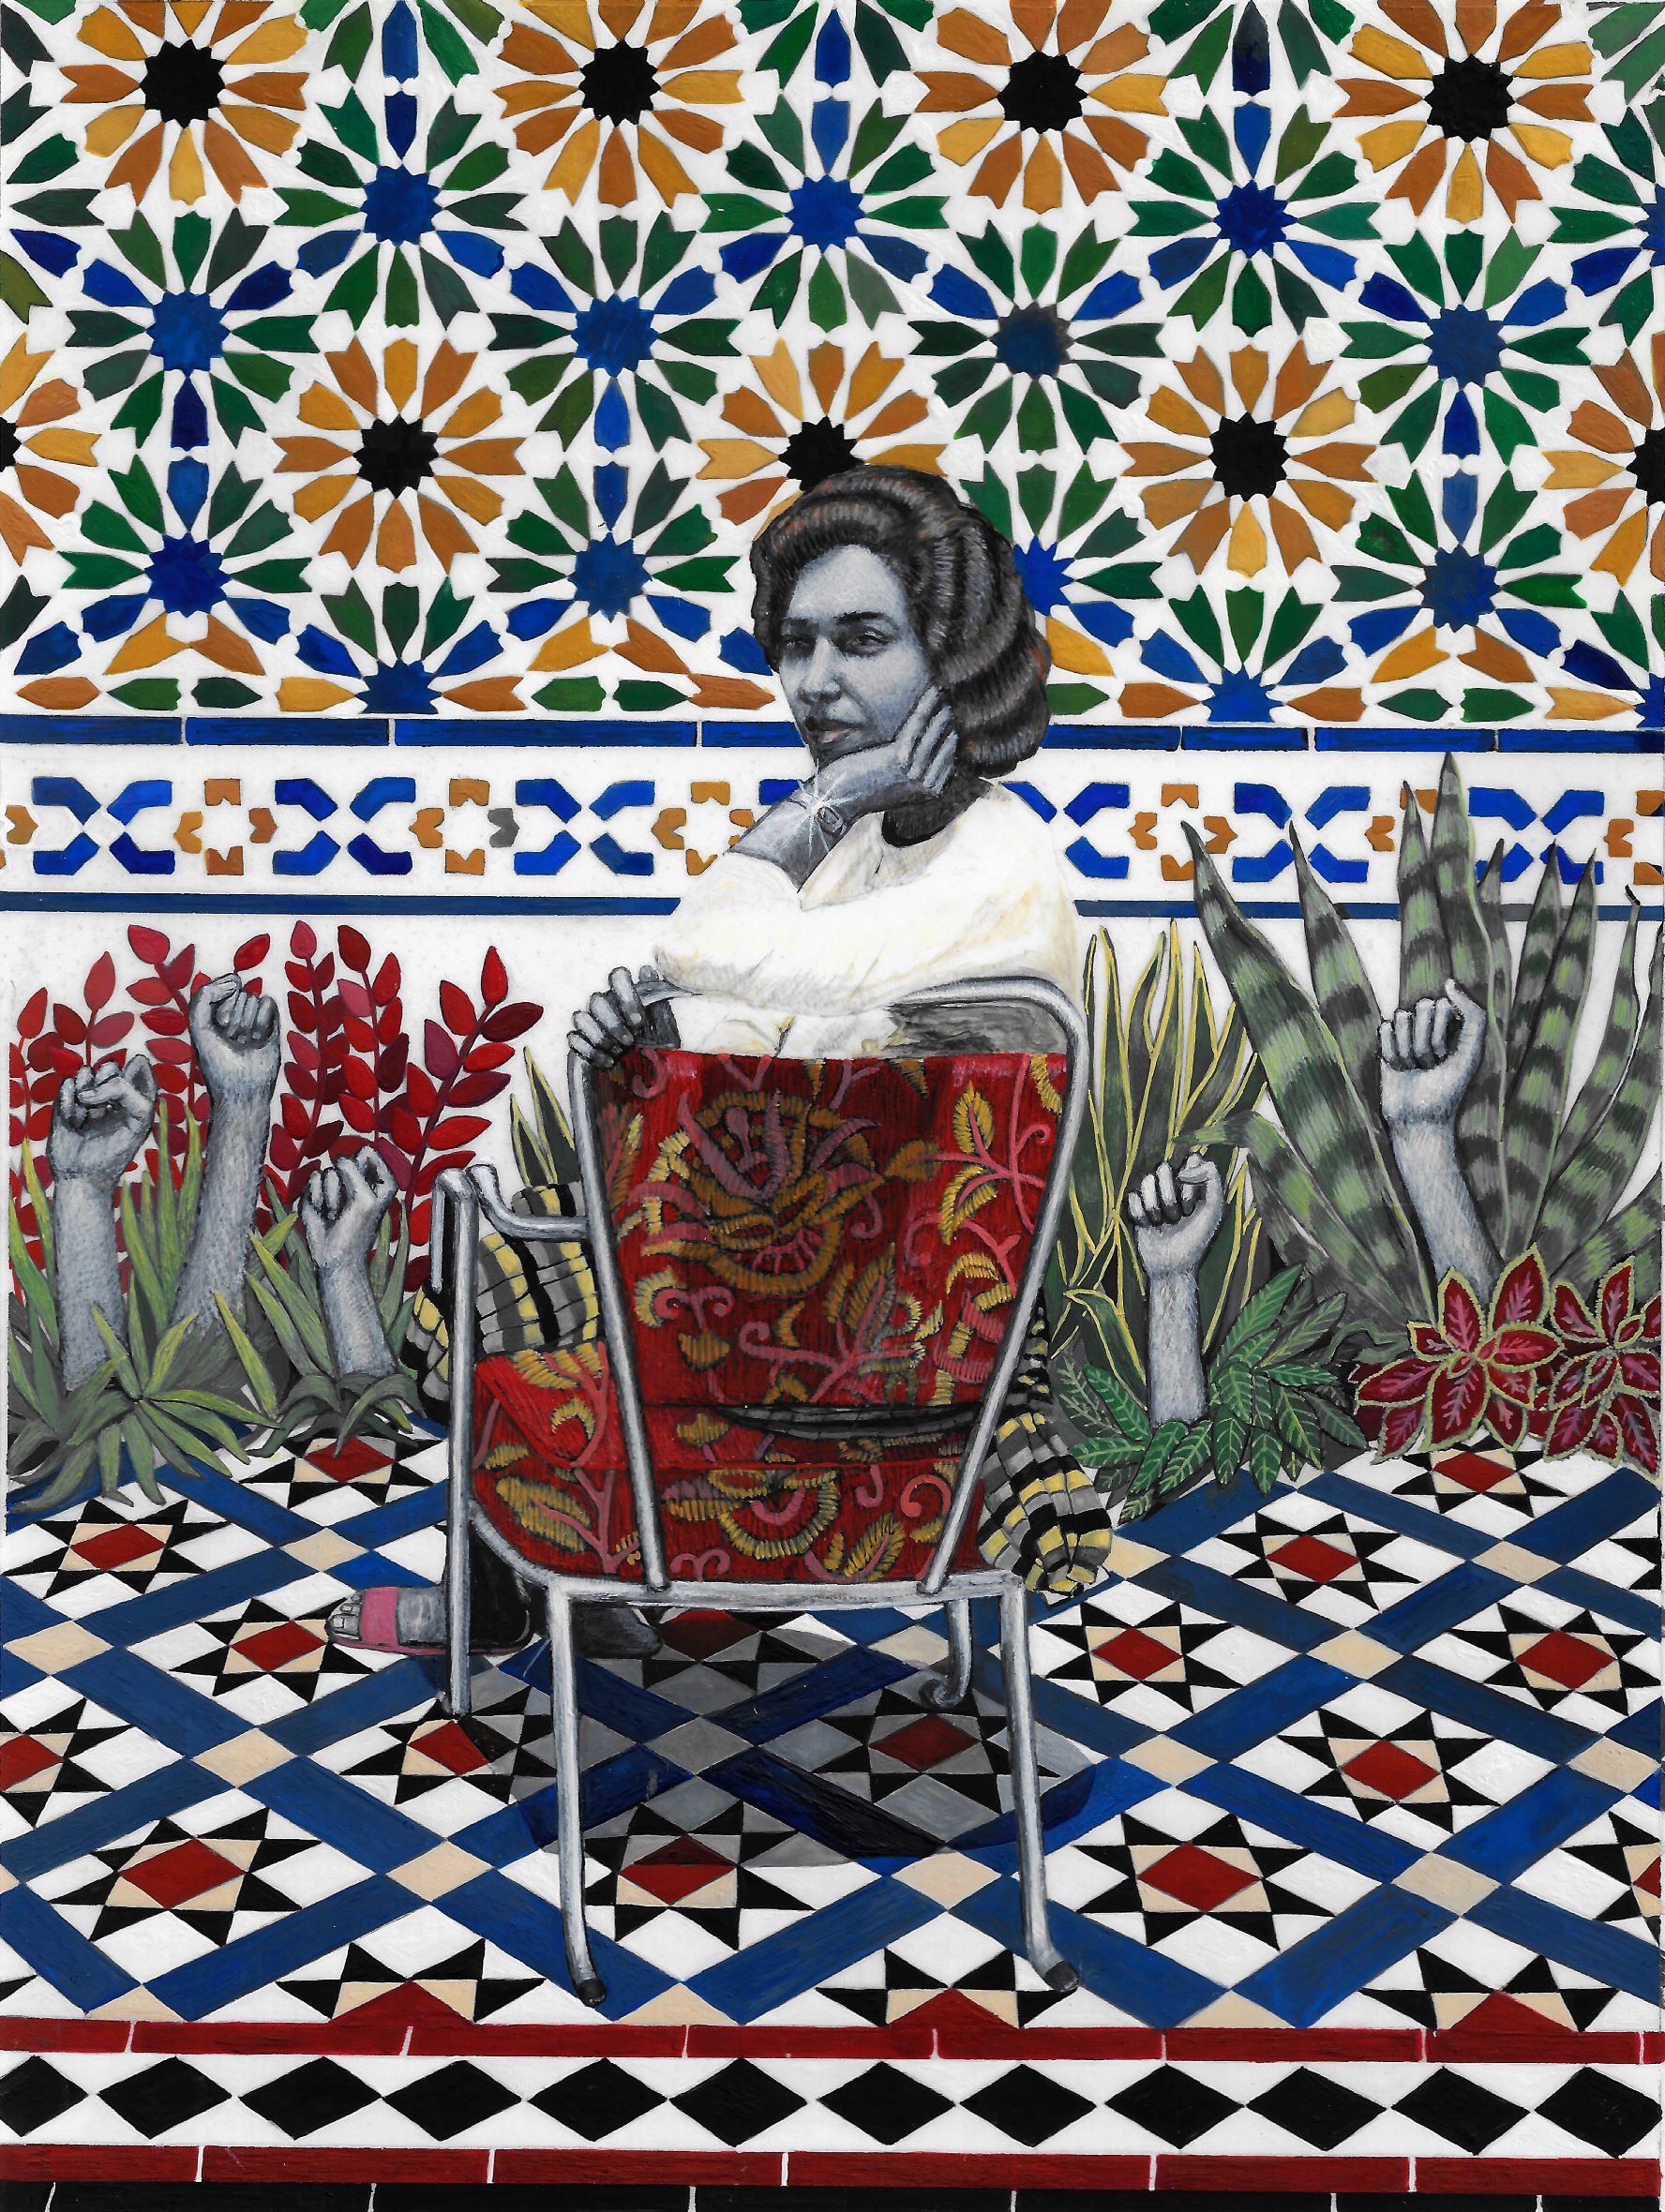 a painting of a woman sitting on a chair and looking over her shoulder at us, in a highly decorative setting. Fists emerge from plants in the background.